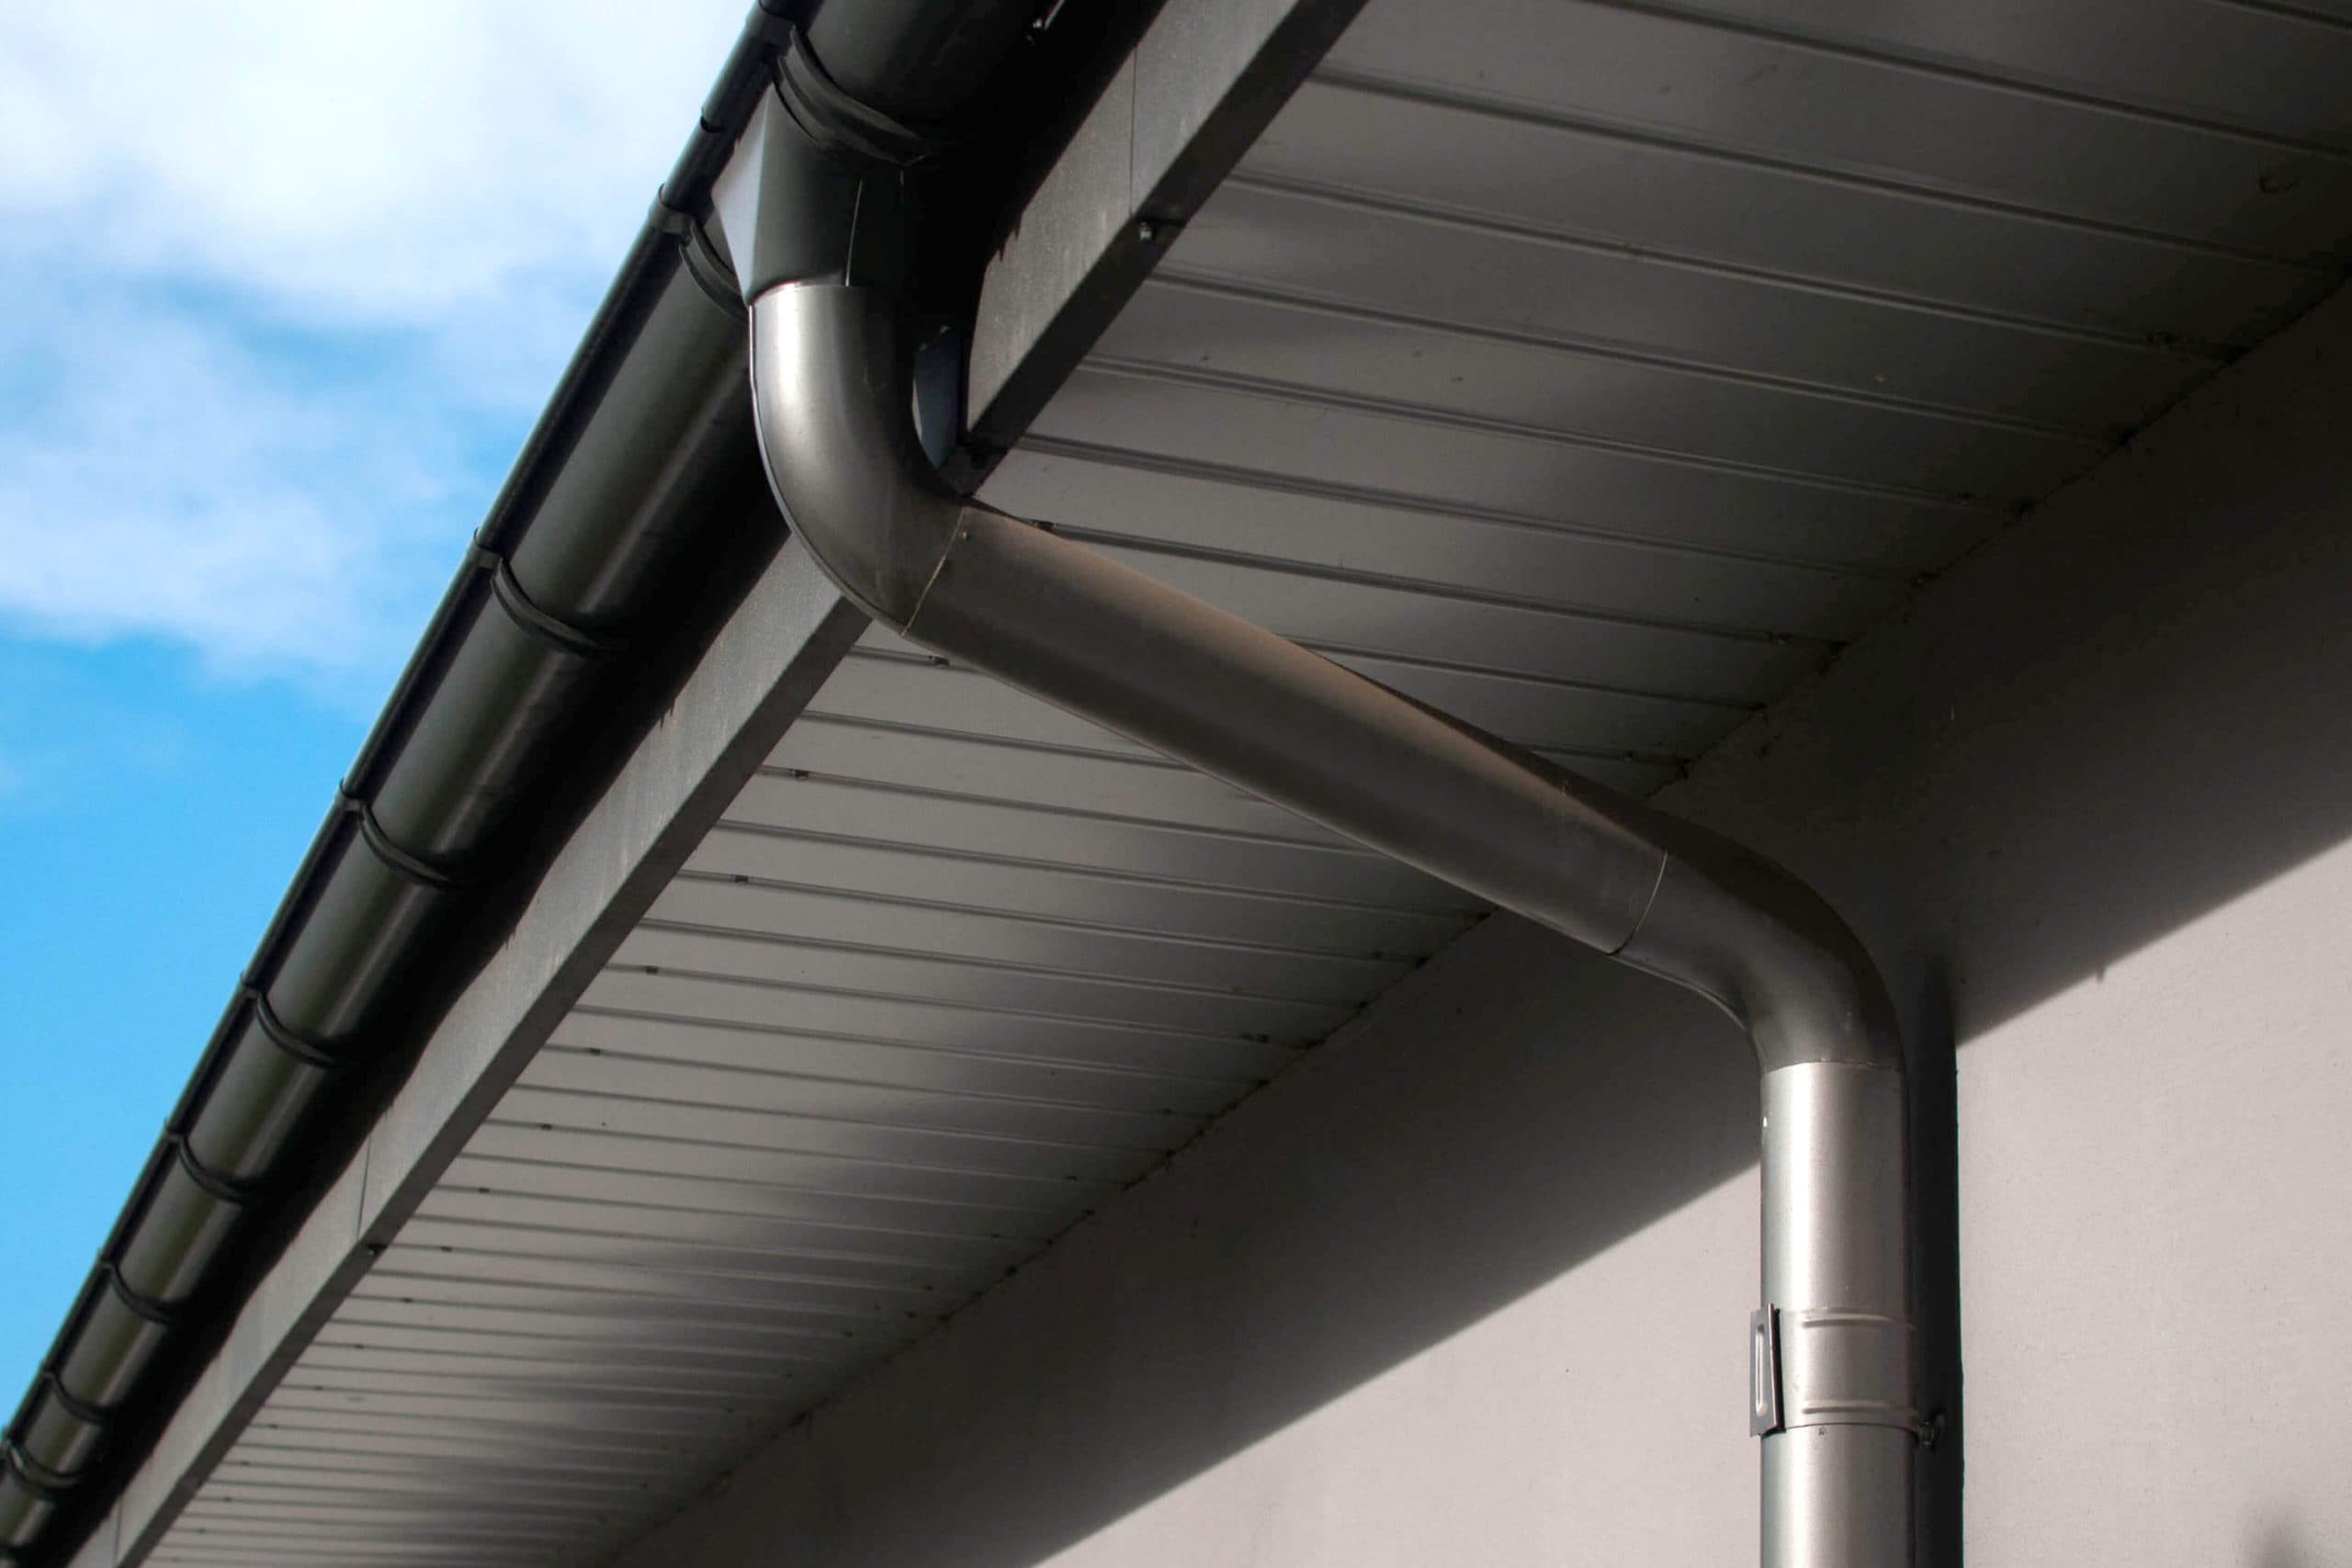 Reliable and affordable Galvanized gutters installation in Greensboro